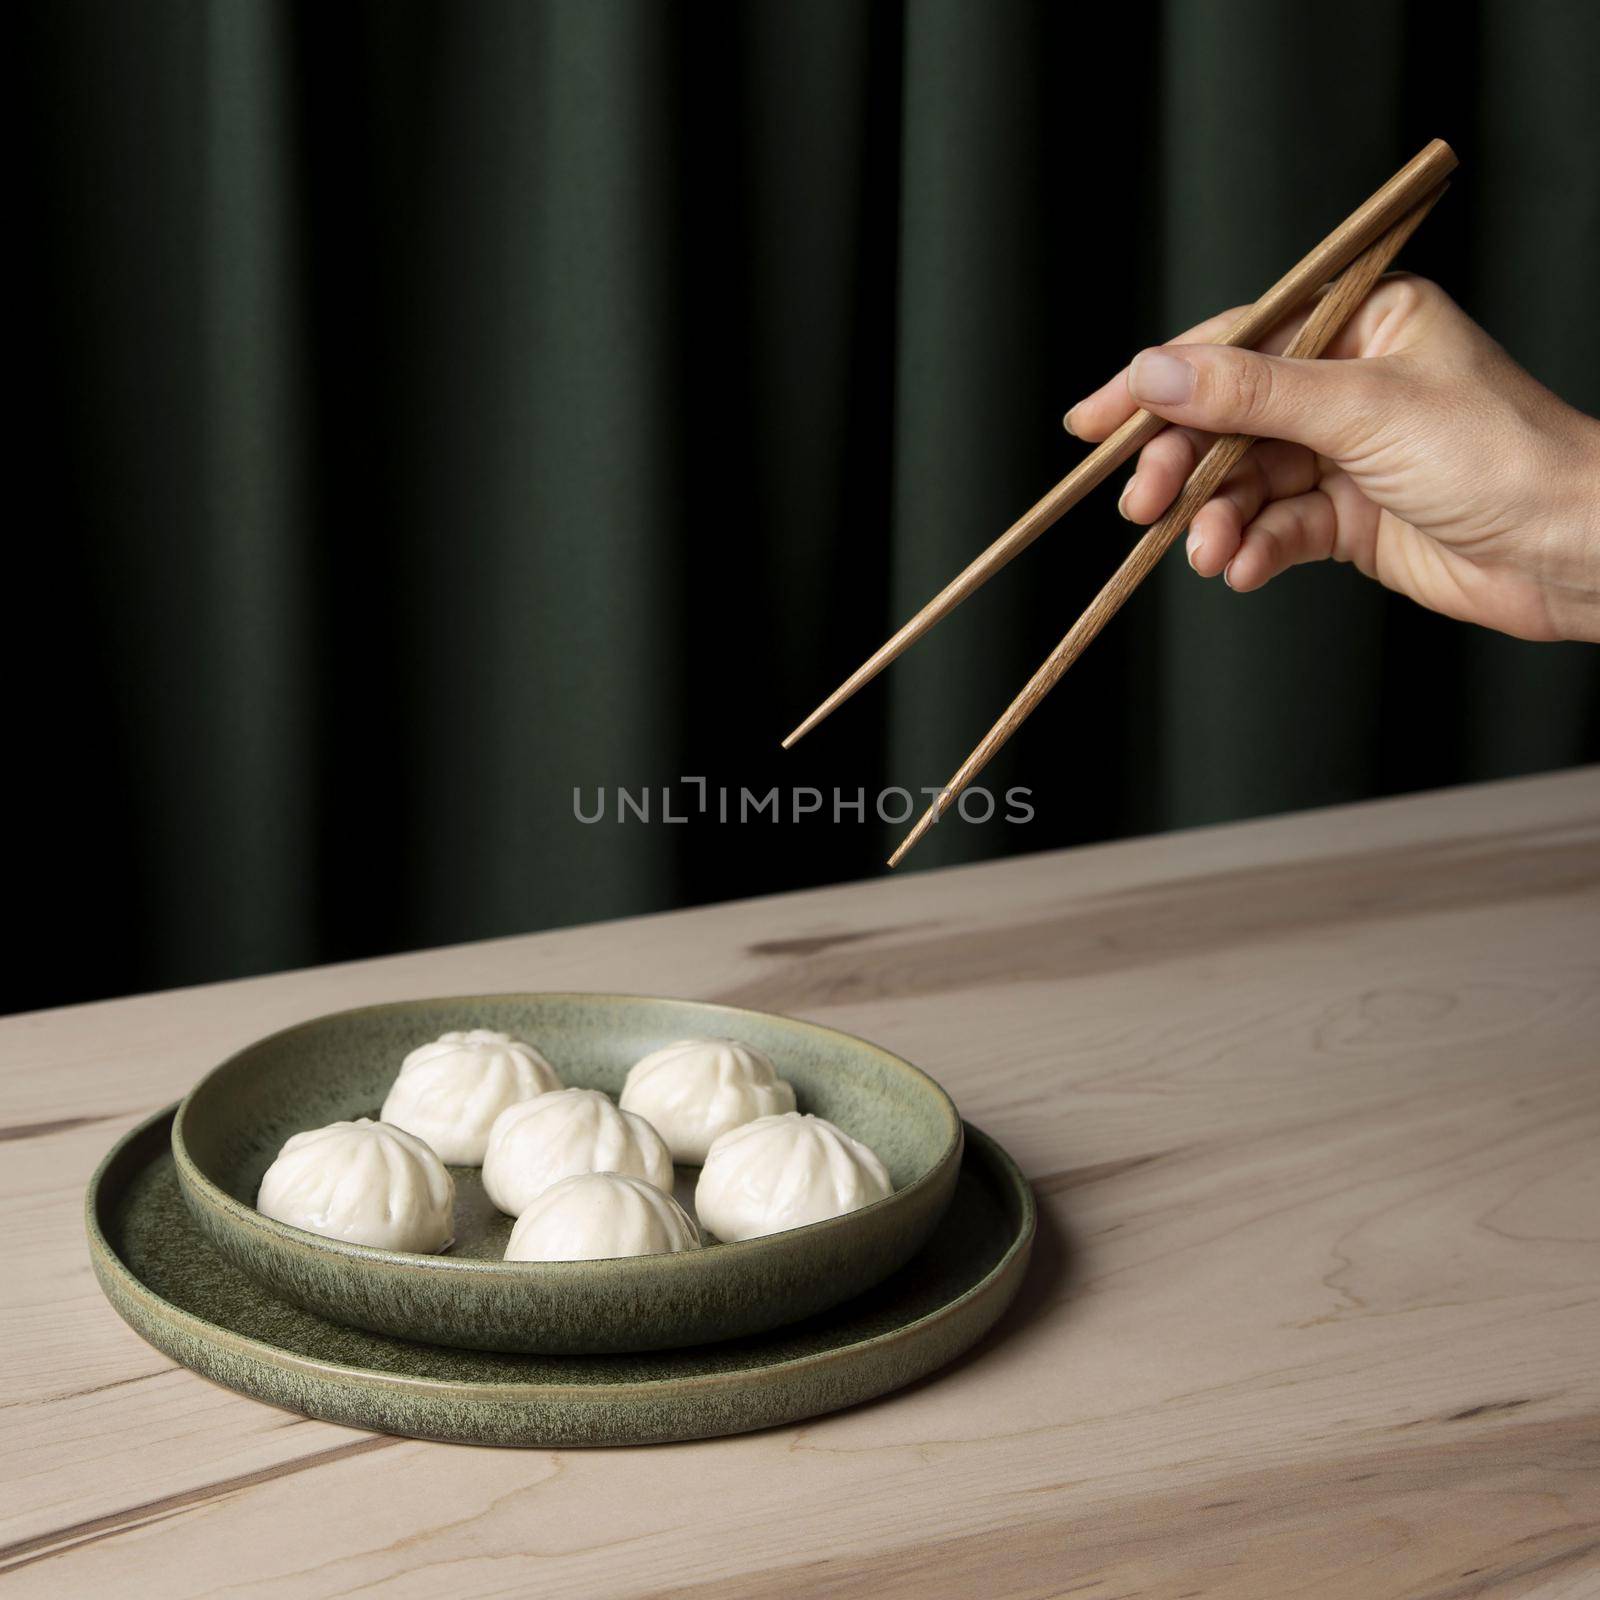 close up view dumplings wooden table by Zahard